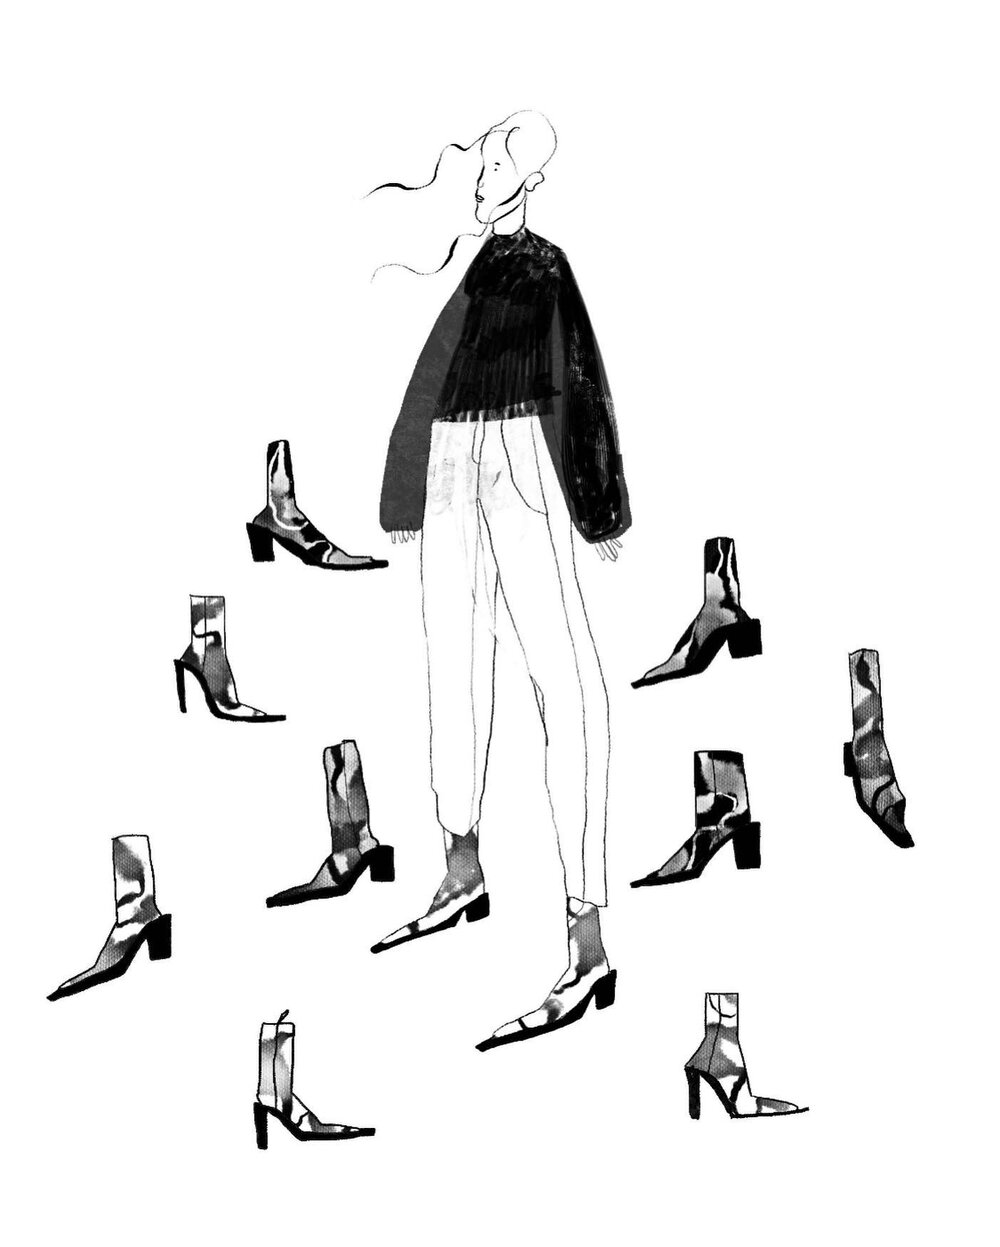 A drawing based on a pair of shoes 
 
 
 
#fashionillustration #illustration #menah #digitaldrawing #procreatebrushes #ootd #fashion #drawing